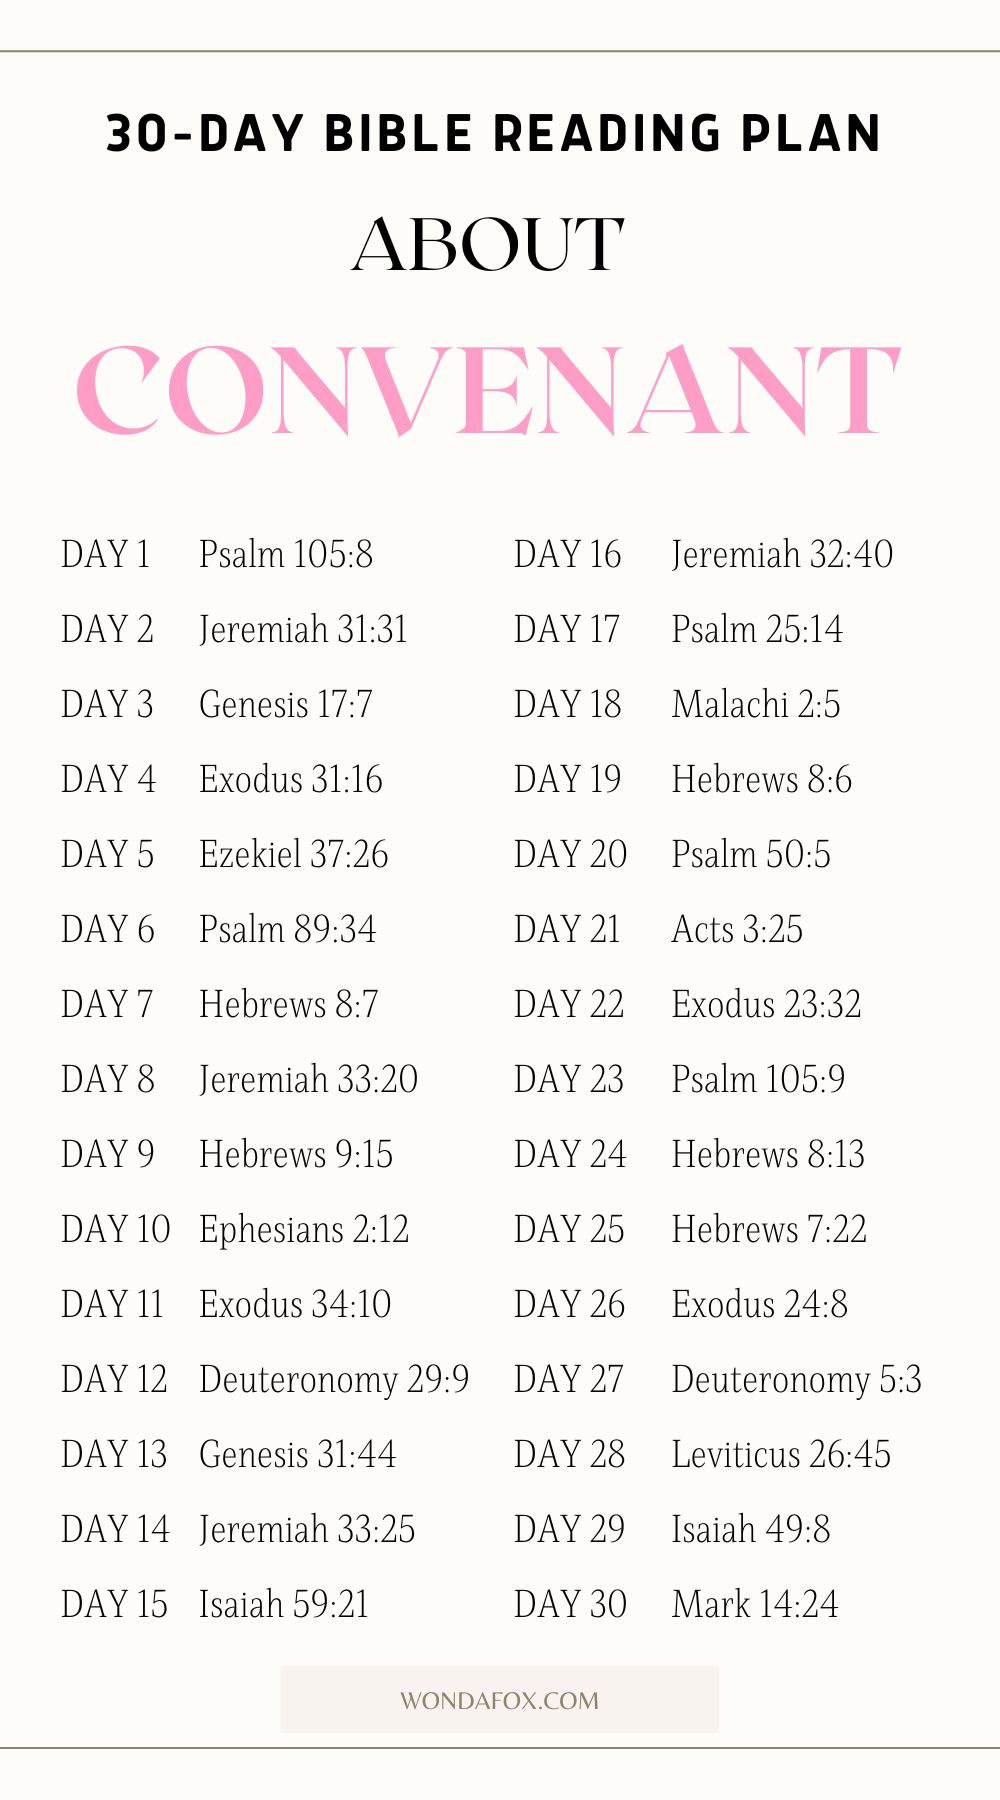 30-day bible reading plan about covenant